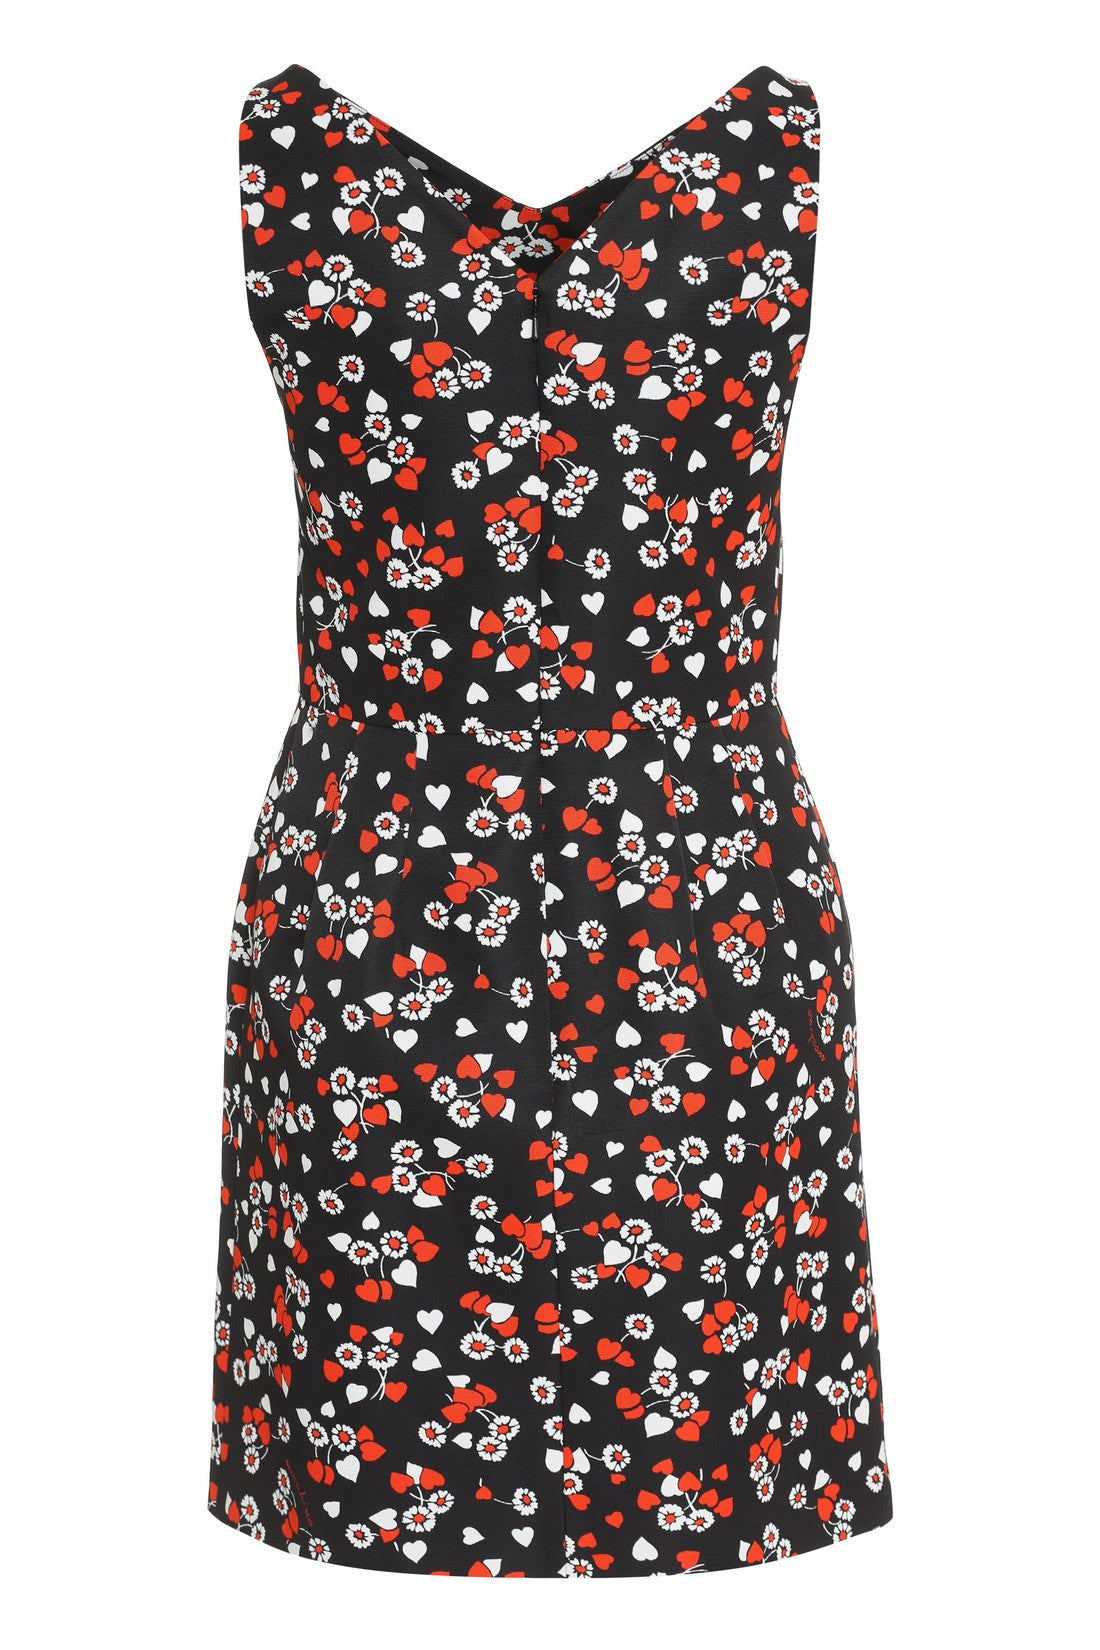 Moschino-OUTLET-SALE-Printed mini dress-ARCHIVIST